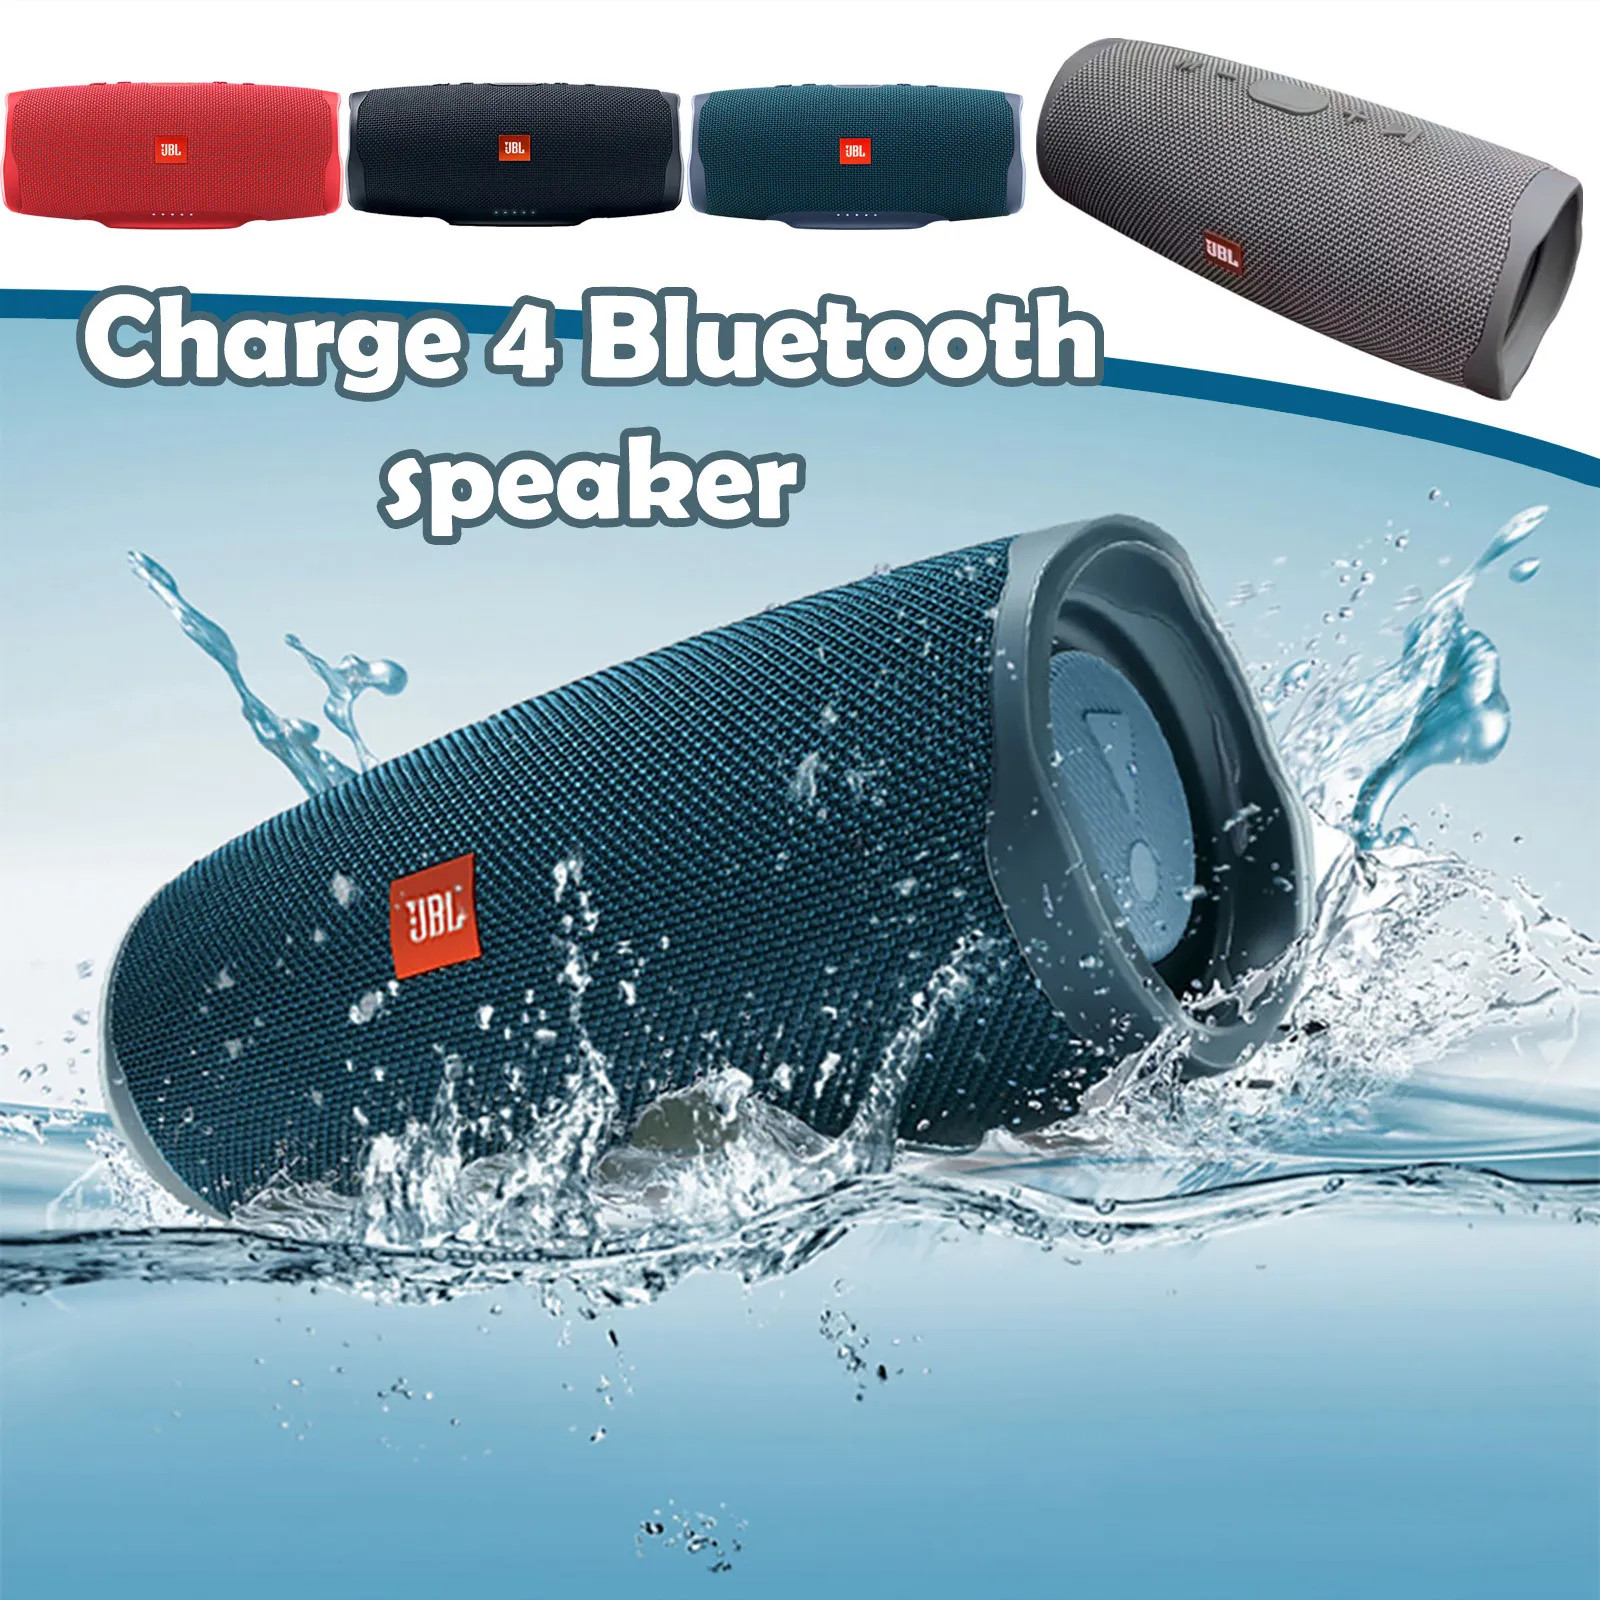 JBL Charge4 Wireless Bluetooth Speaker Charge 4 Portable Waterproof Music Stereo Audio Party Clip3 Pulse Flip 5 Boombox | Электроника